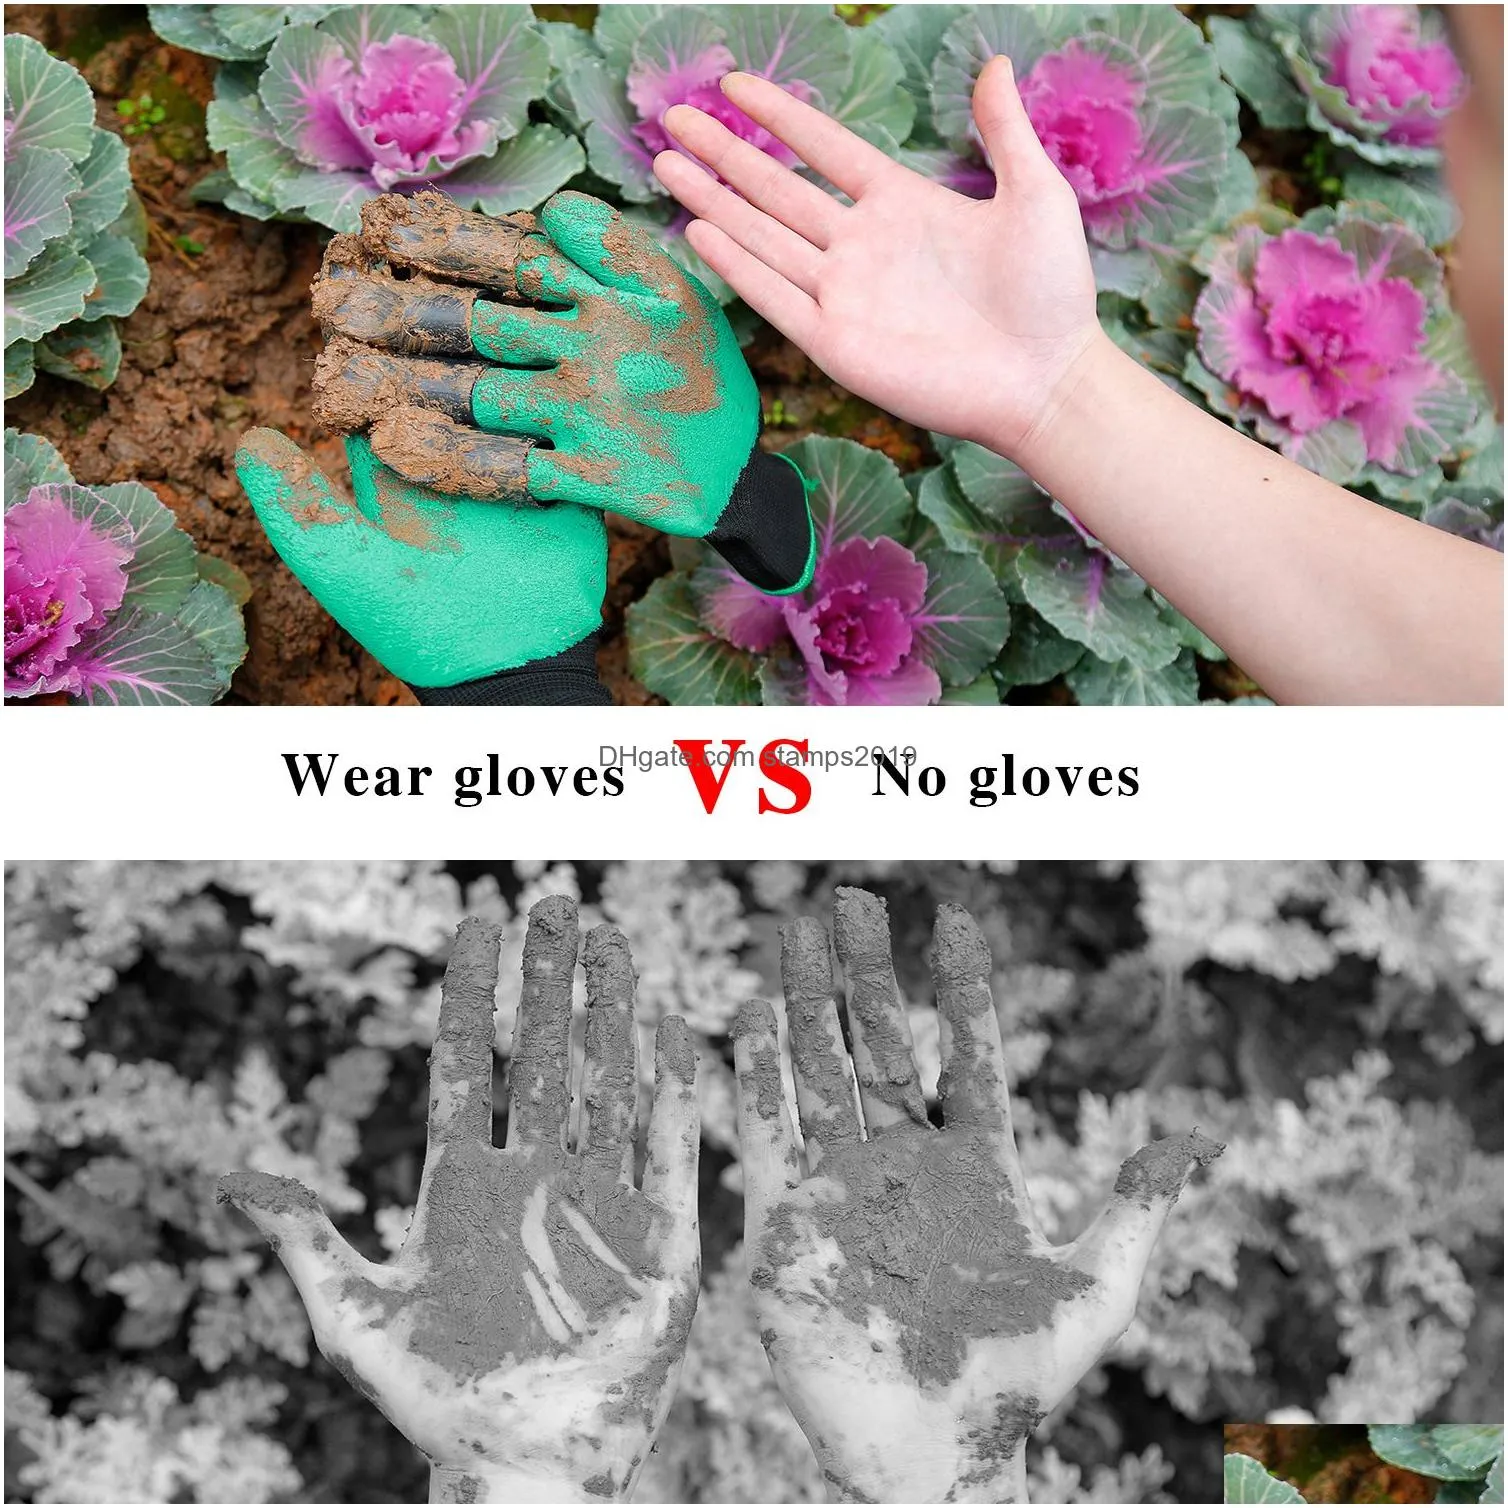 breathable waterproof garden gloves with claws for digging planting weeding other yard work